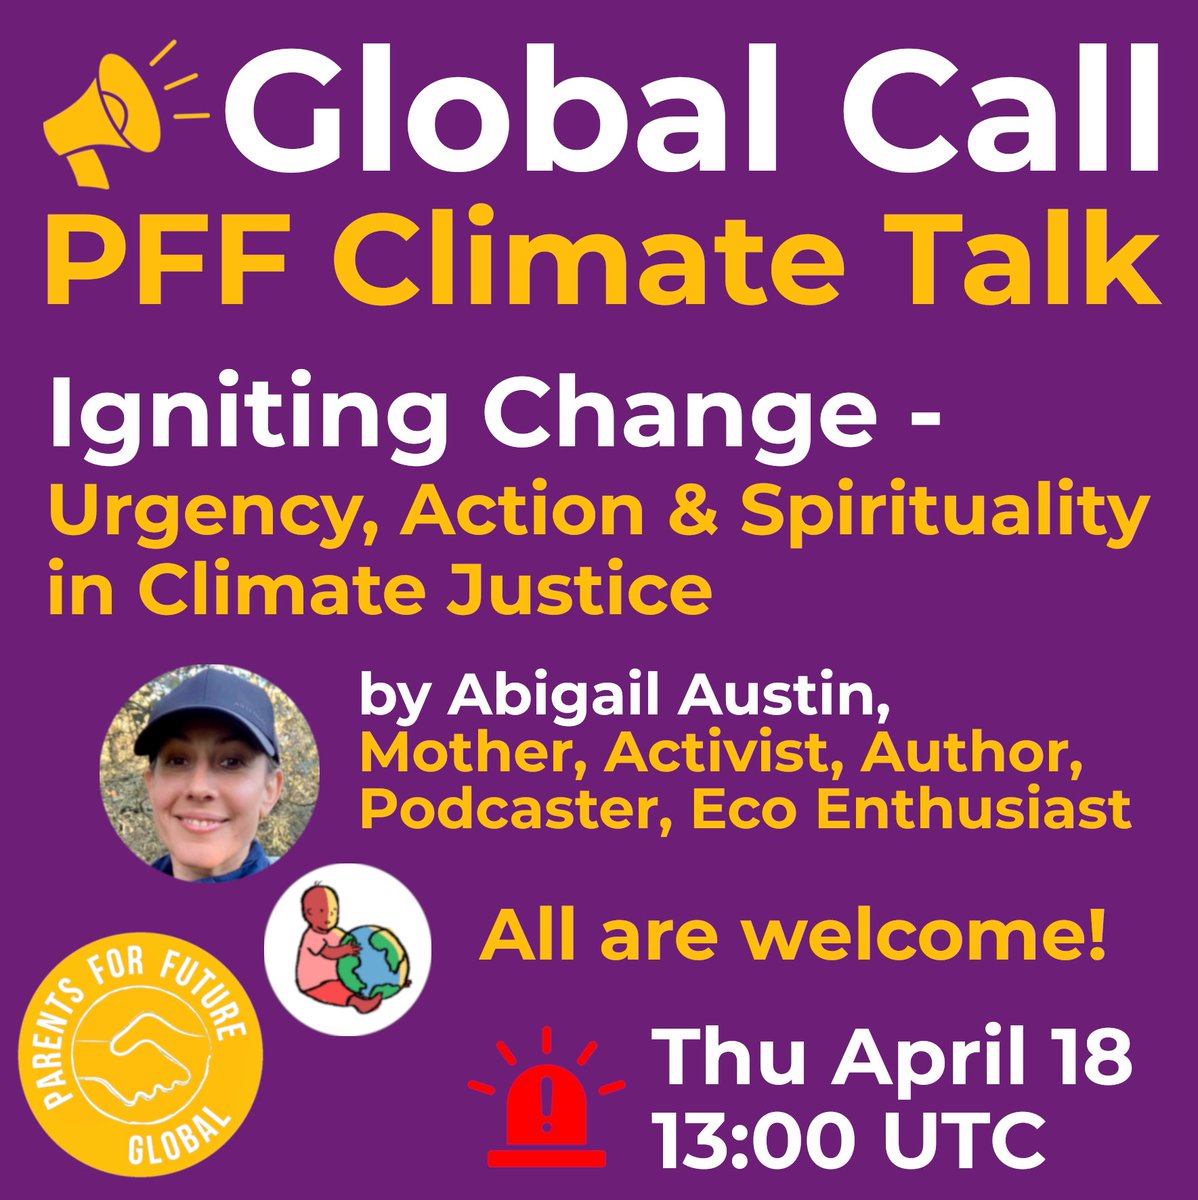 Welcome to the special edition of our PFF Climate Talk for the #GlobalClimateStrike “Igniting Change - Urgency, Action & Spirituality in Climate Justice” Thu, Apr 18 13:00 UCT #ClimateJusticeNOW With Abi Austin, mother, activist, author and podcaster. All are welcome!